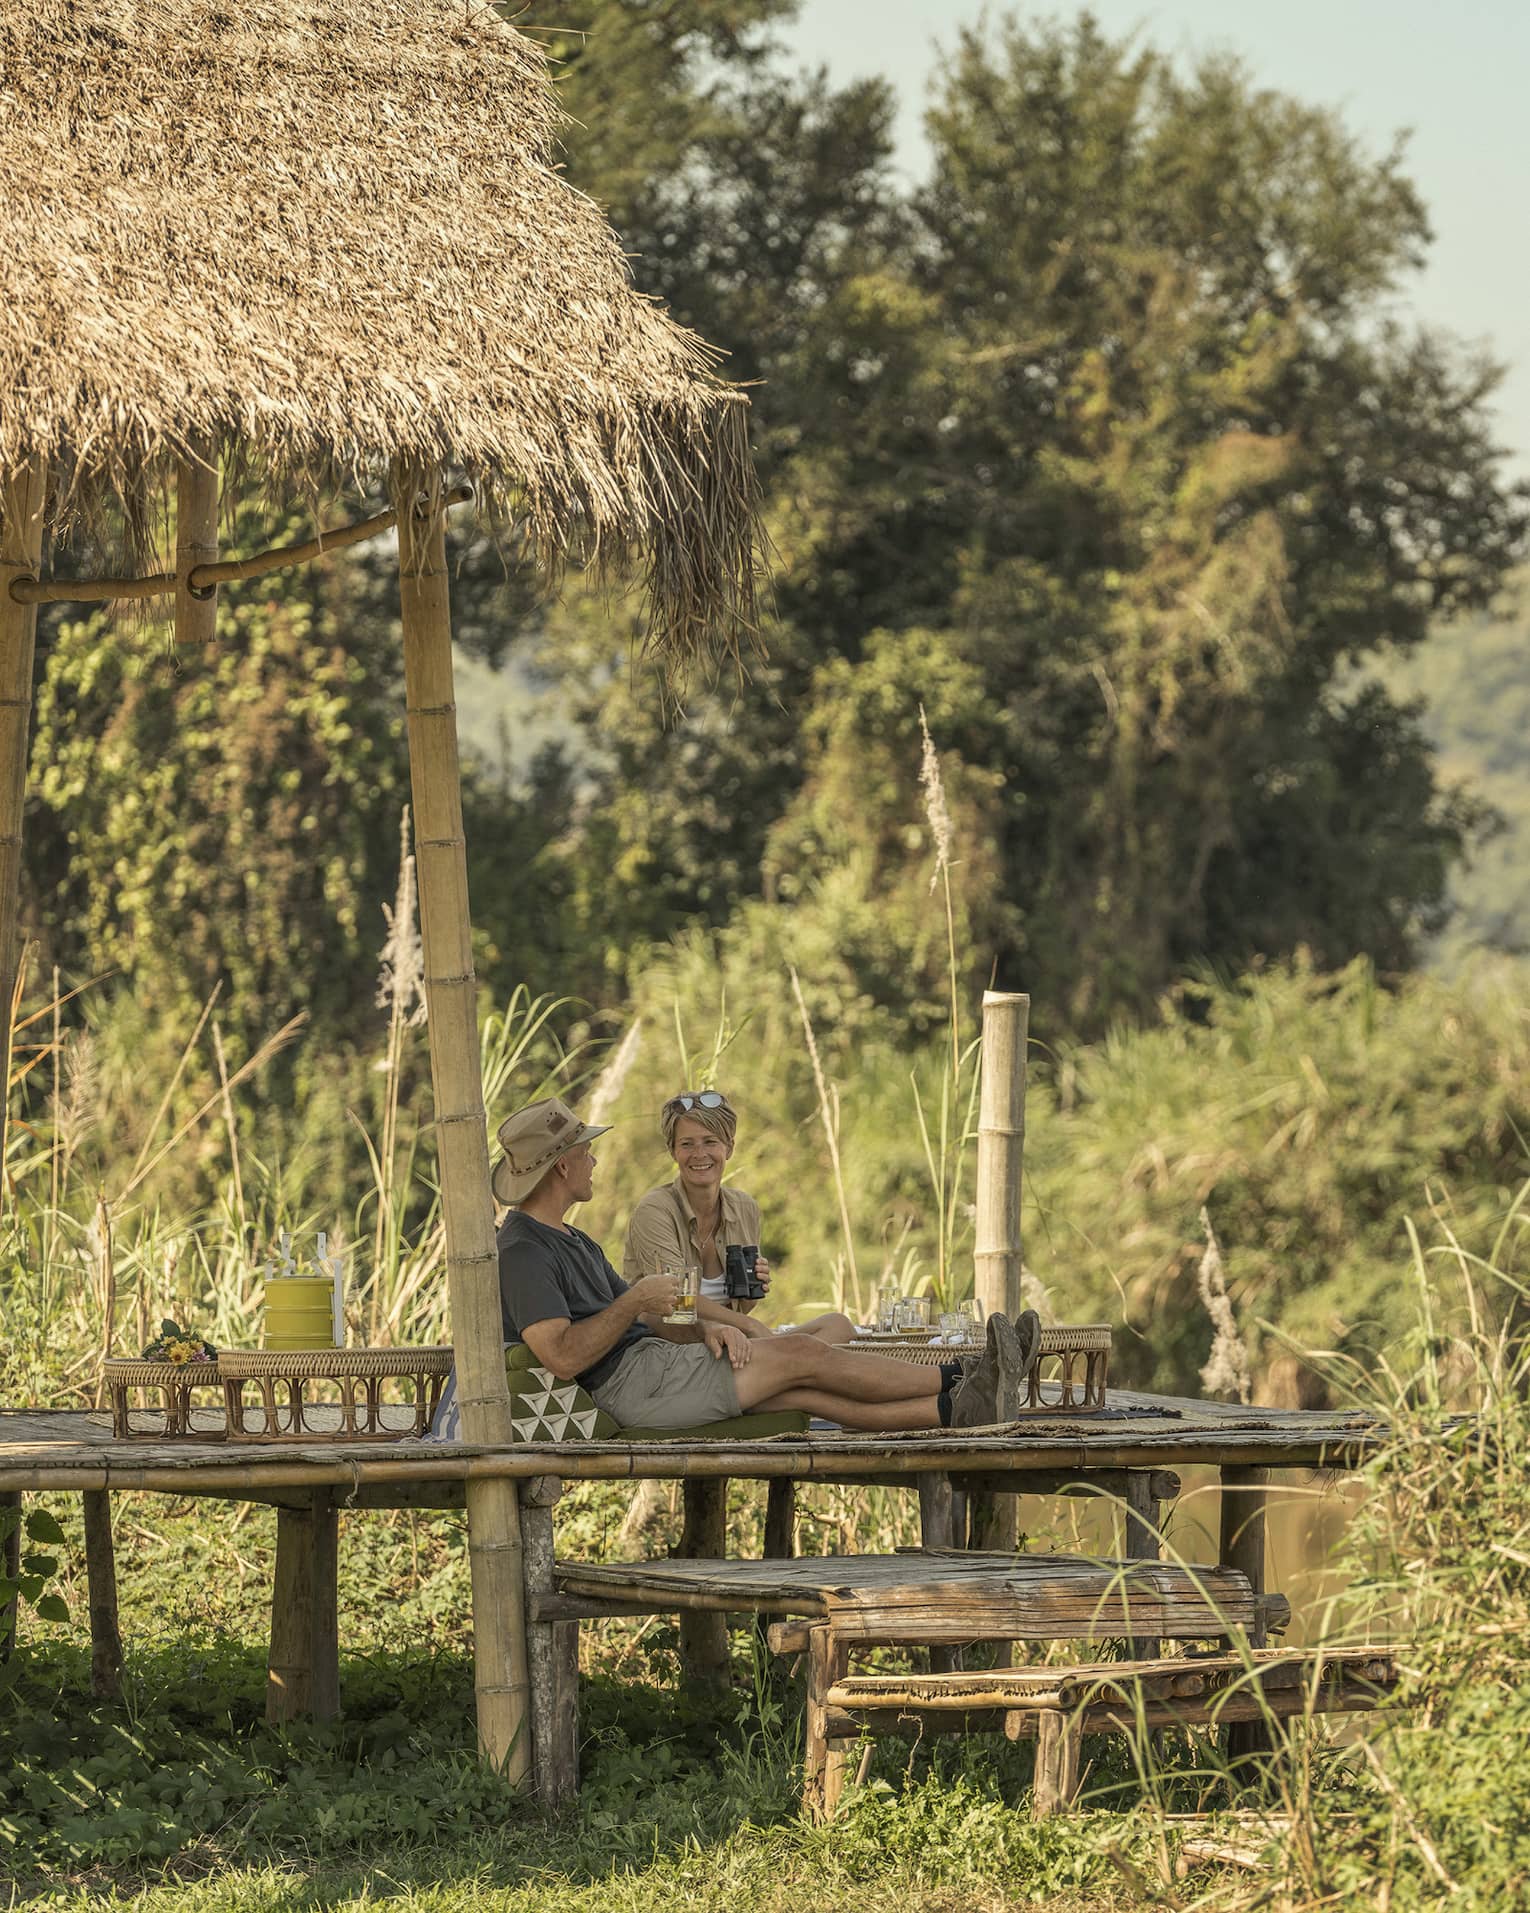 Couple enjoys a camp picnic in the Thai wilderness